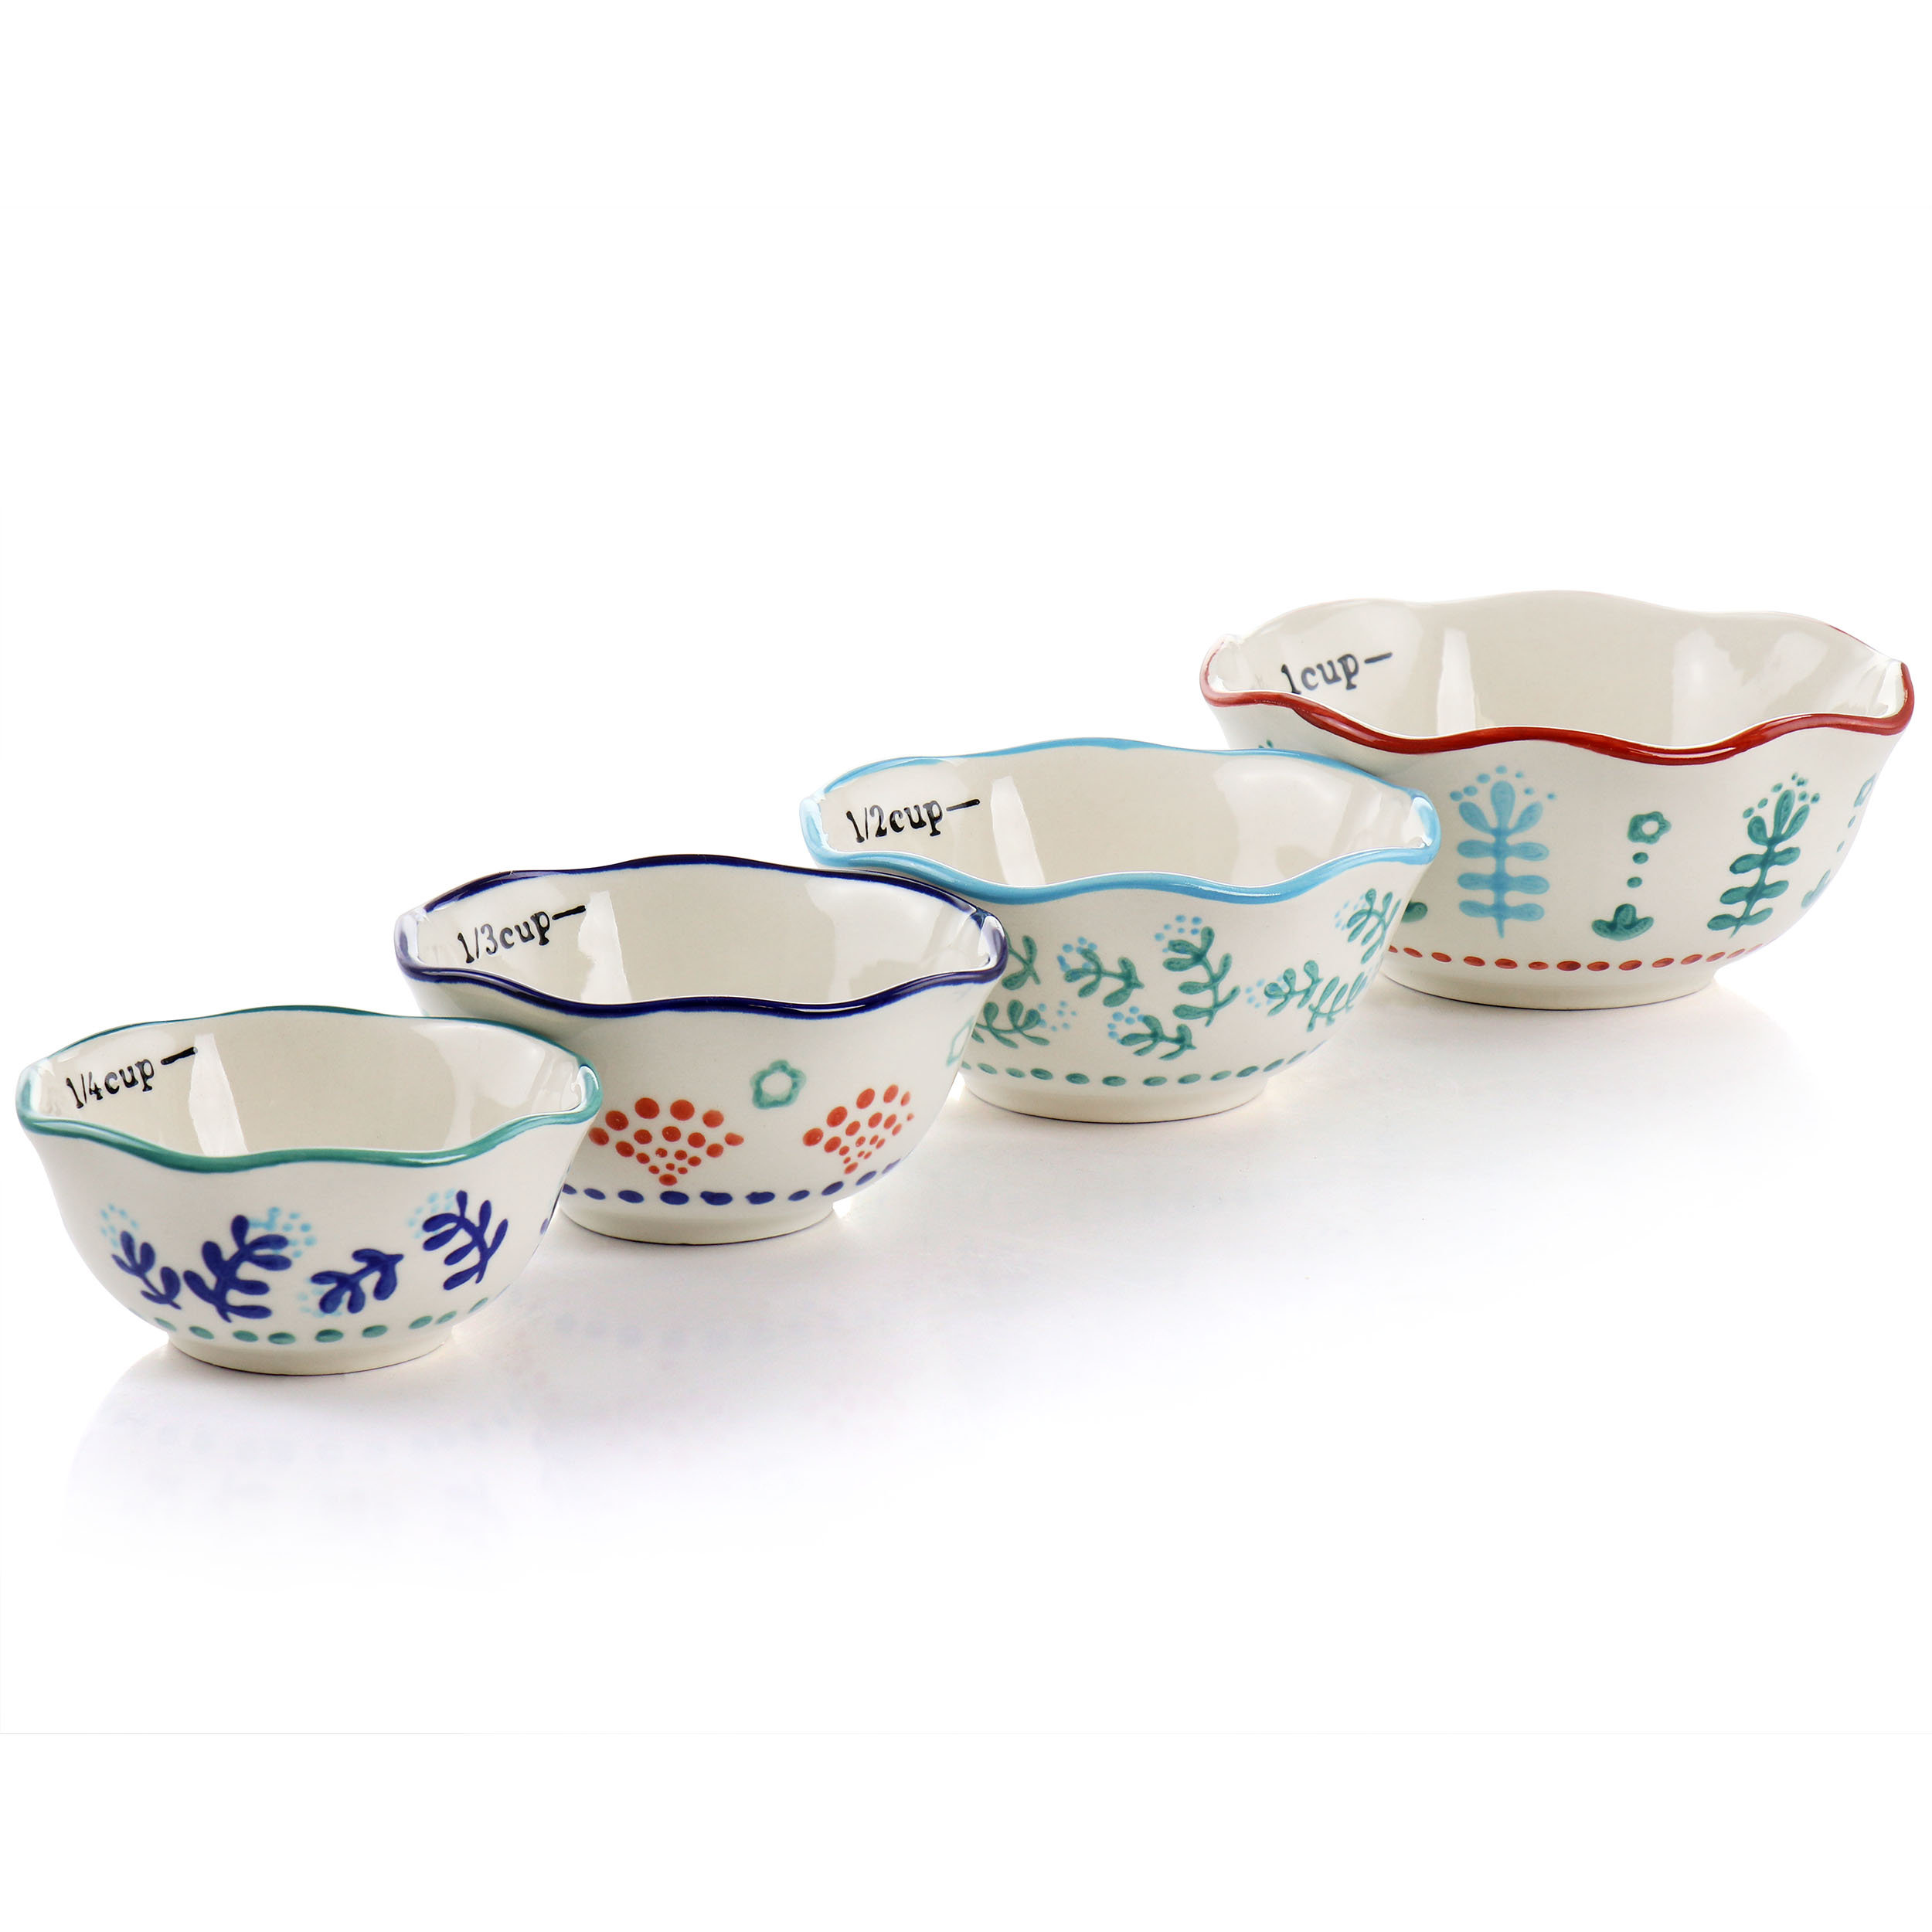 Gibson Home Village Vines 4 Piece Stoneware Measuring Cup Set In Multi